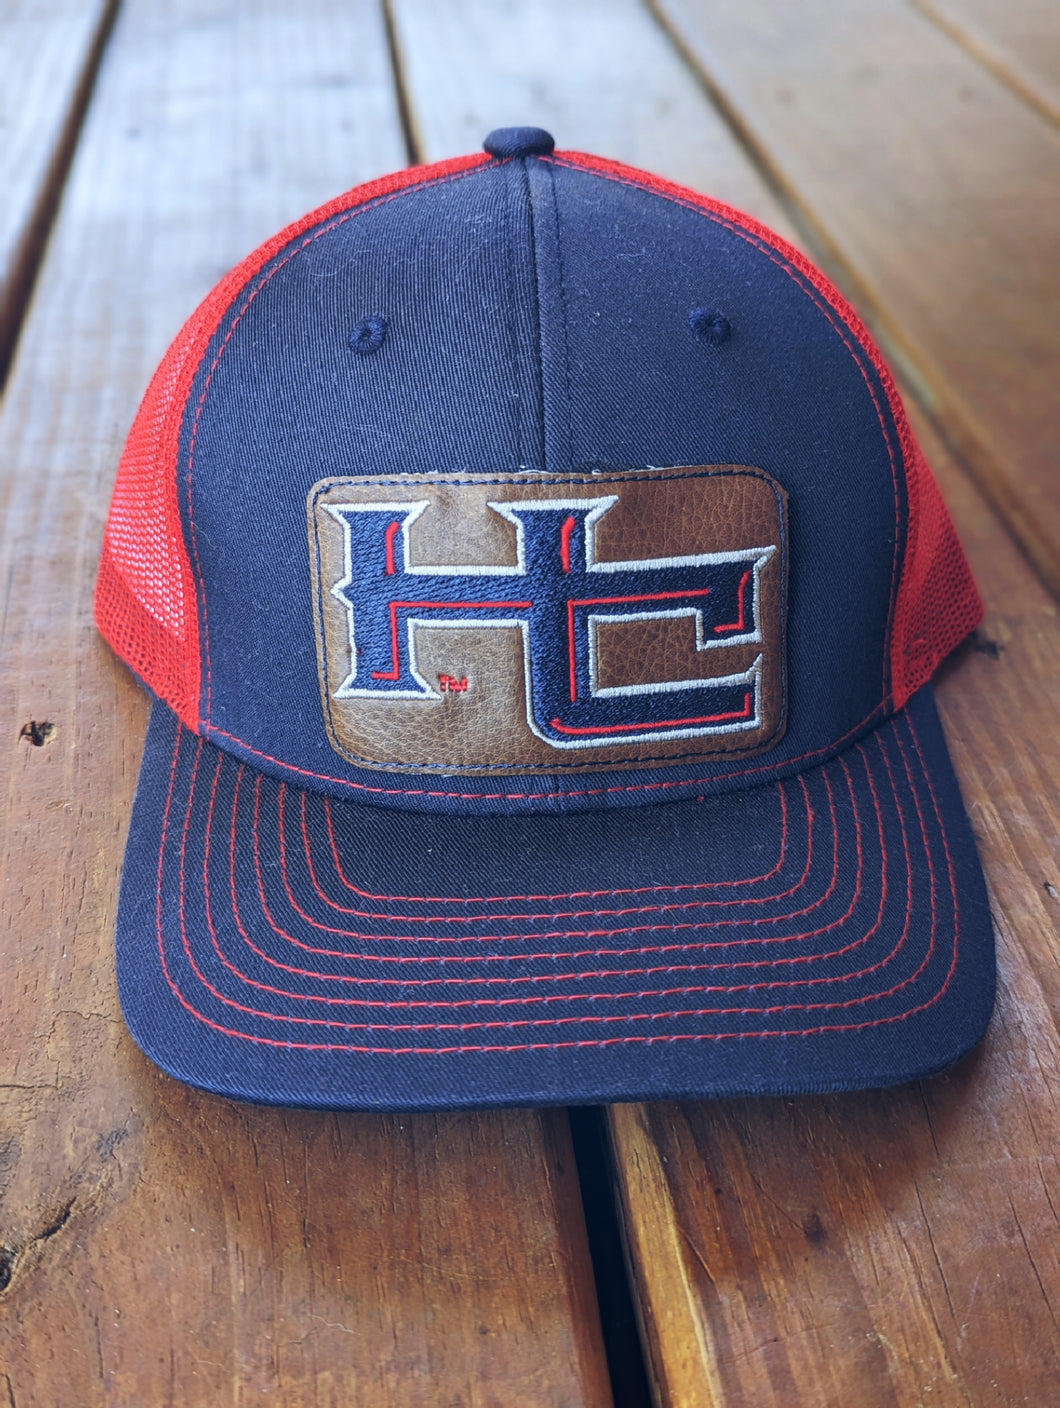 Navy and red HC hat